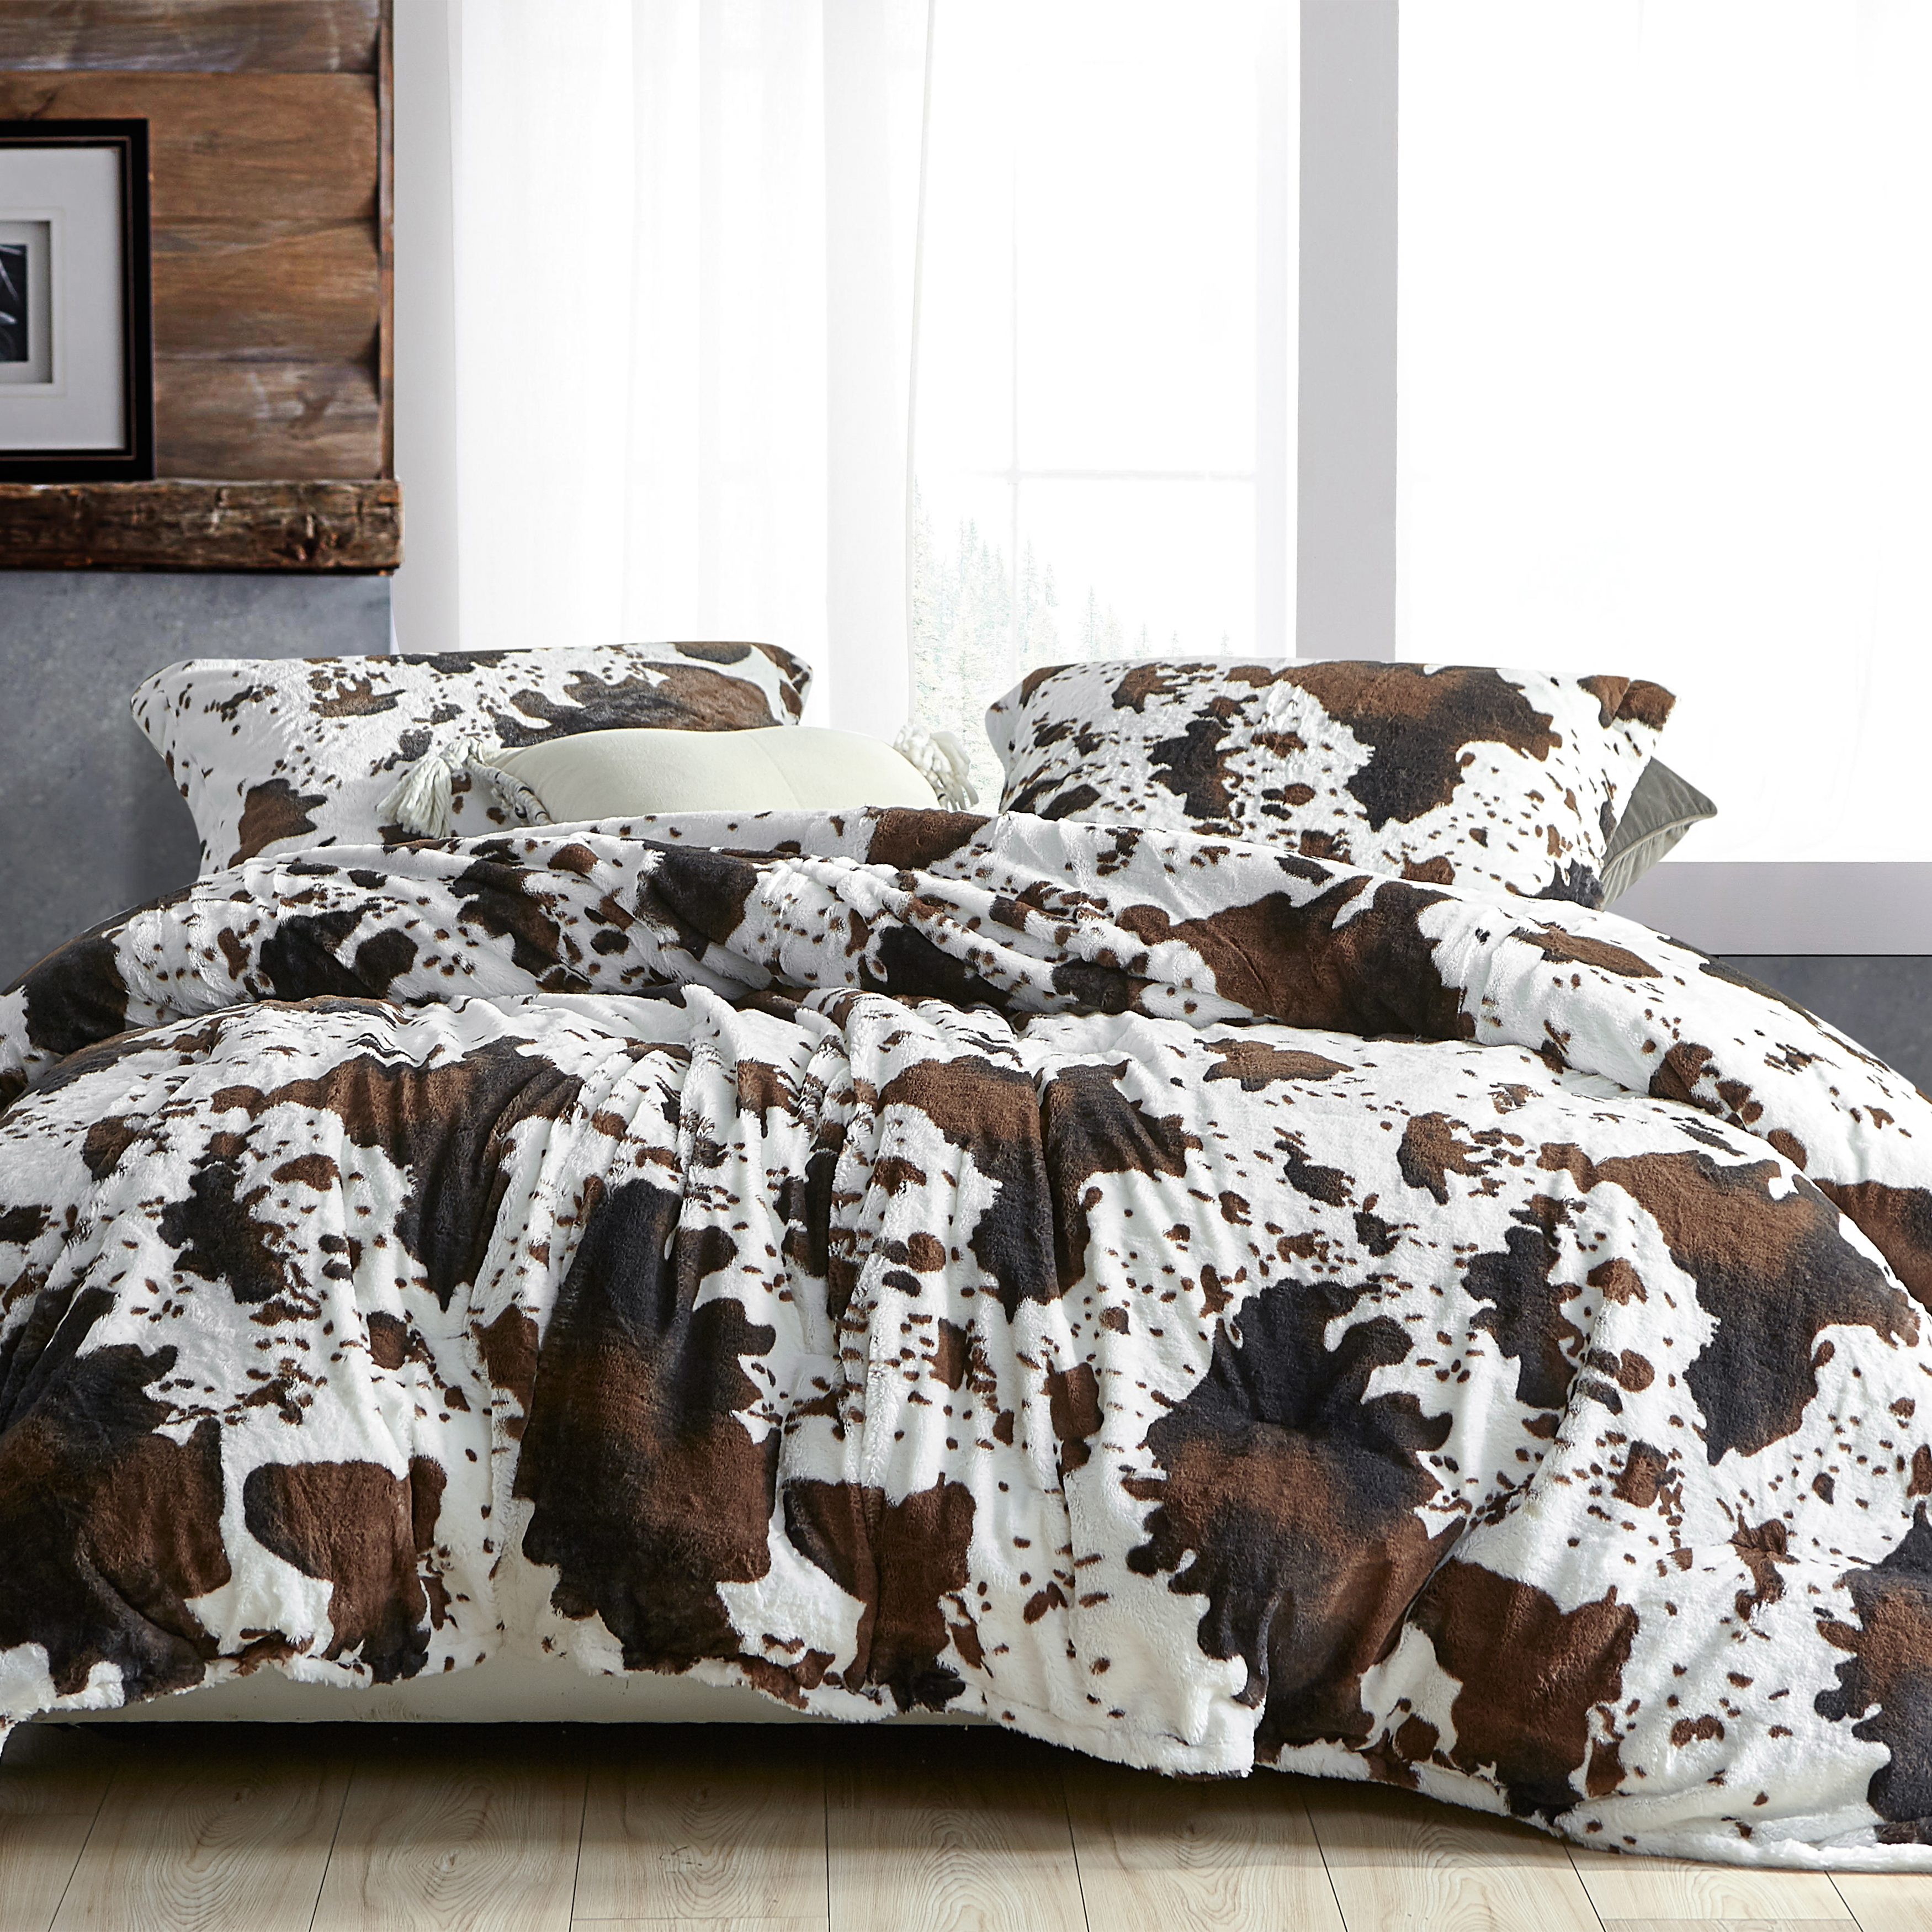 Moo Cow - Coma Inducer Oversized Comforter